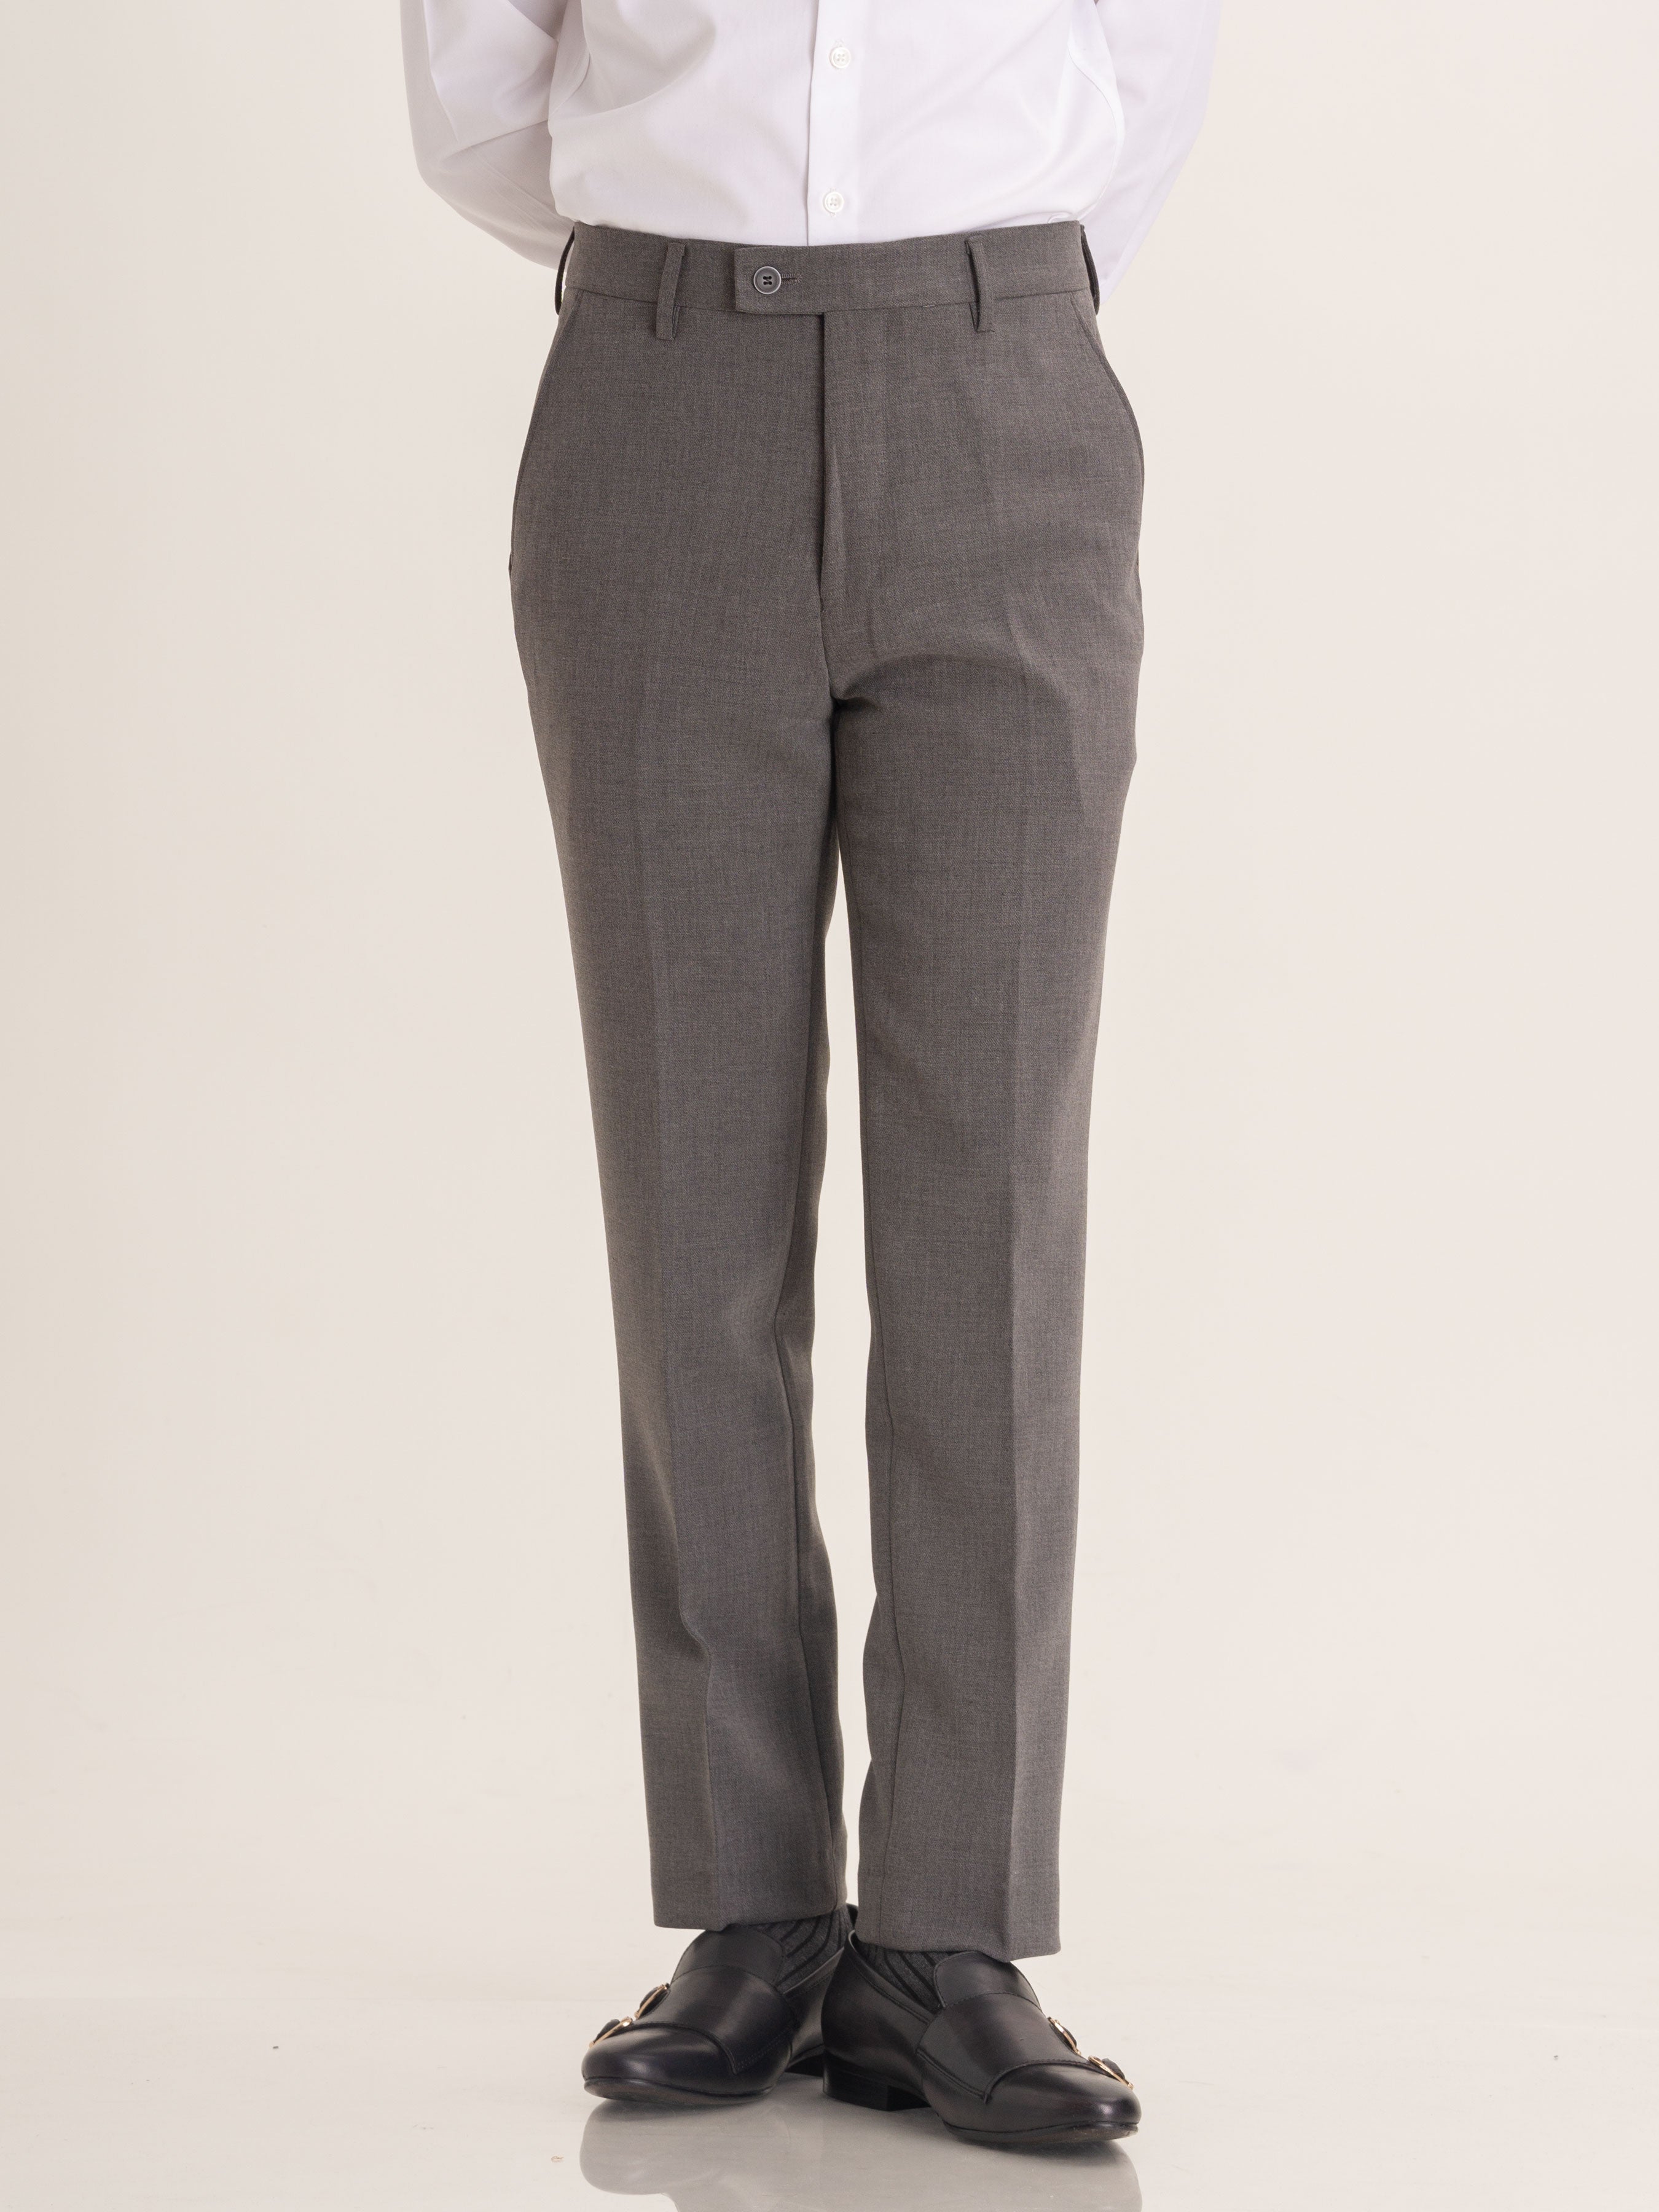 Trousers With Belt Loop - Grey Plain (Stretchable) - Zeve Shoes